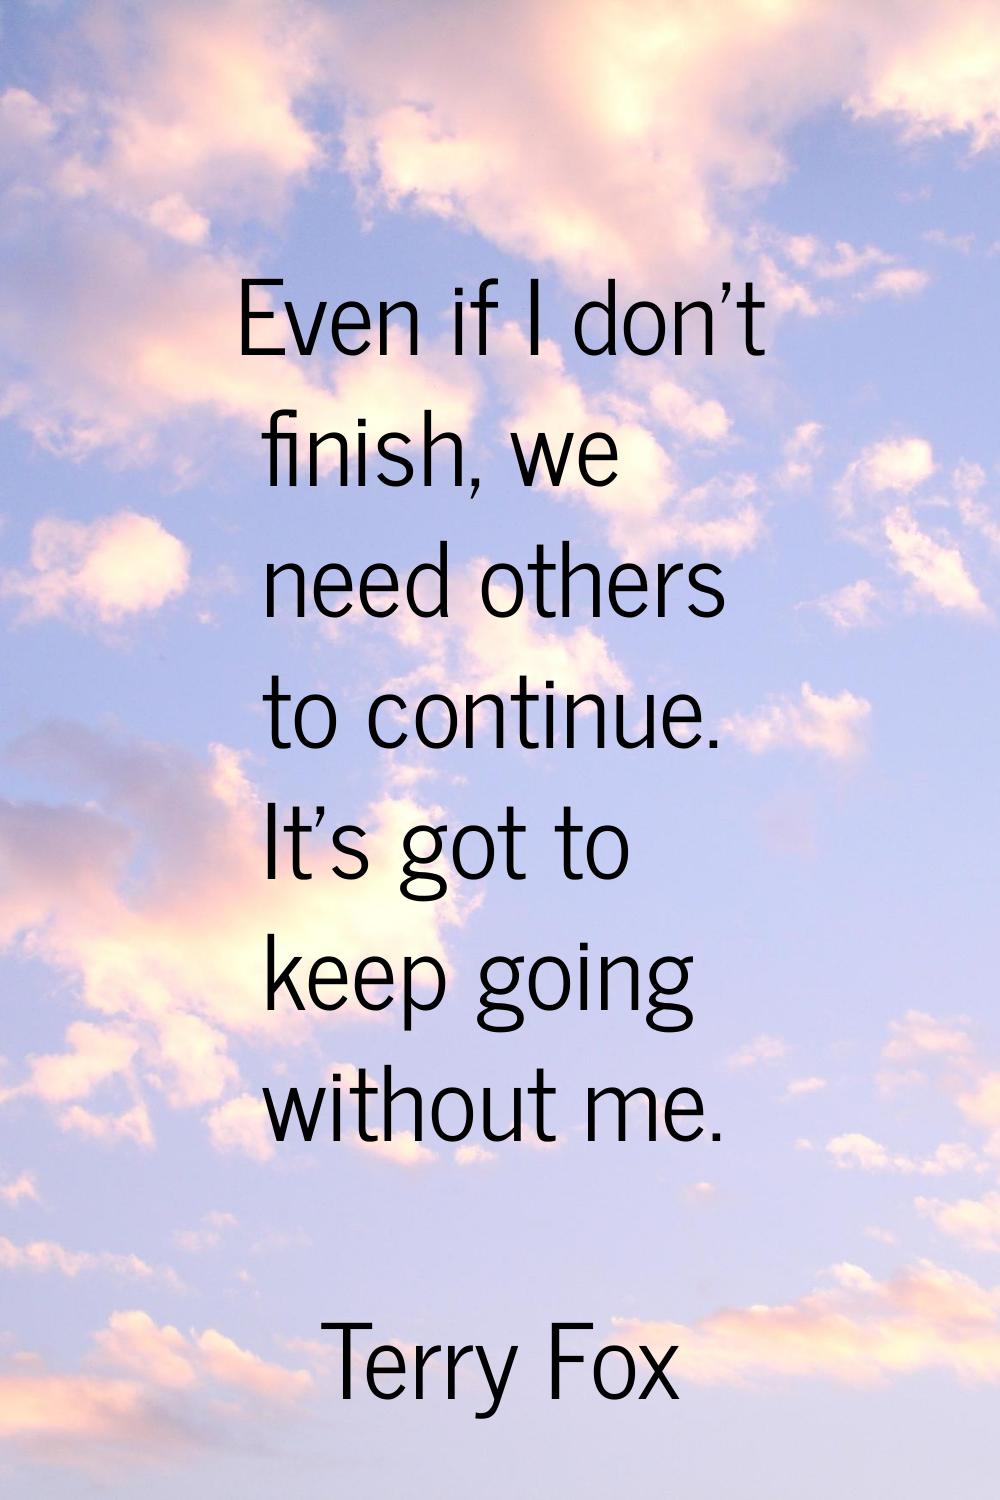 Even if I don't finish, we need others to continue. It's got to keep going without me.